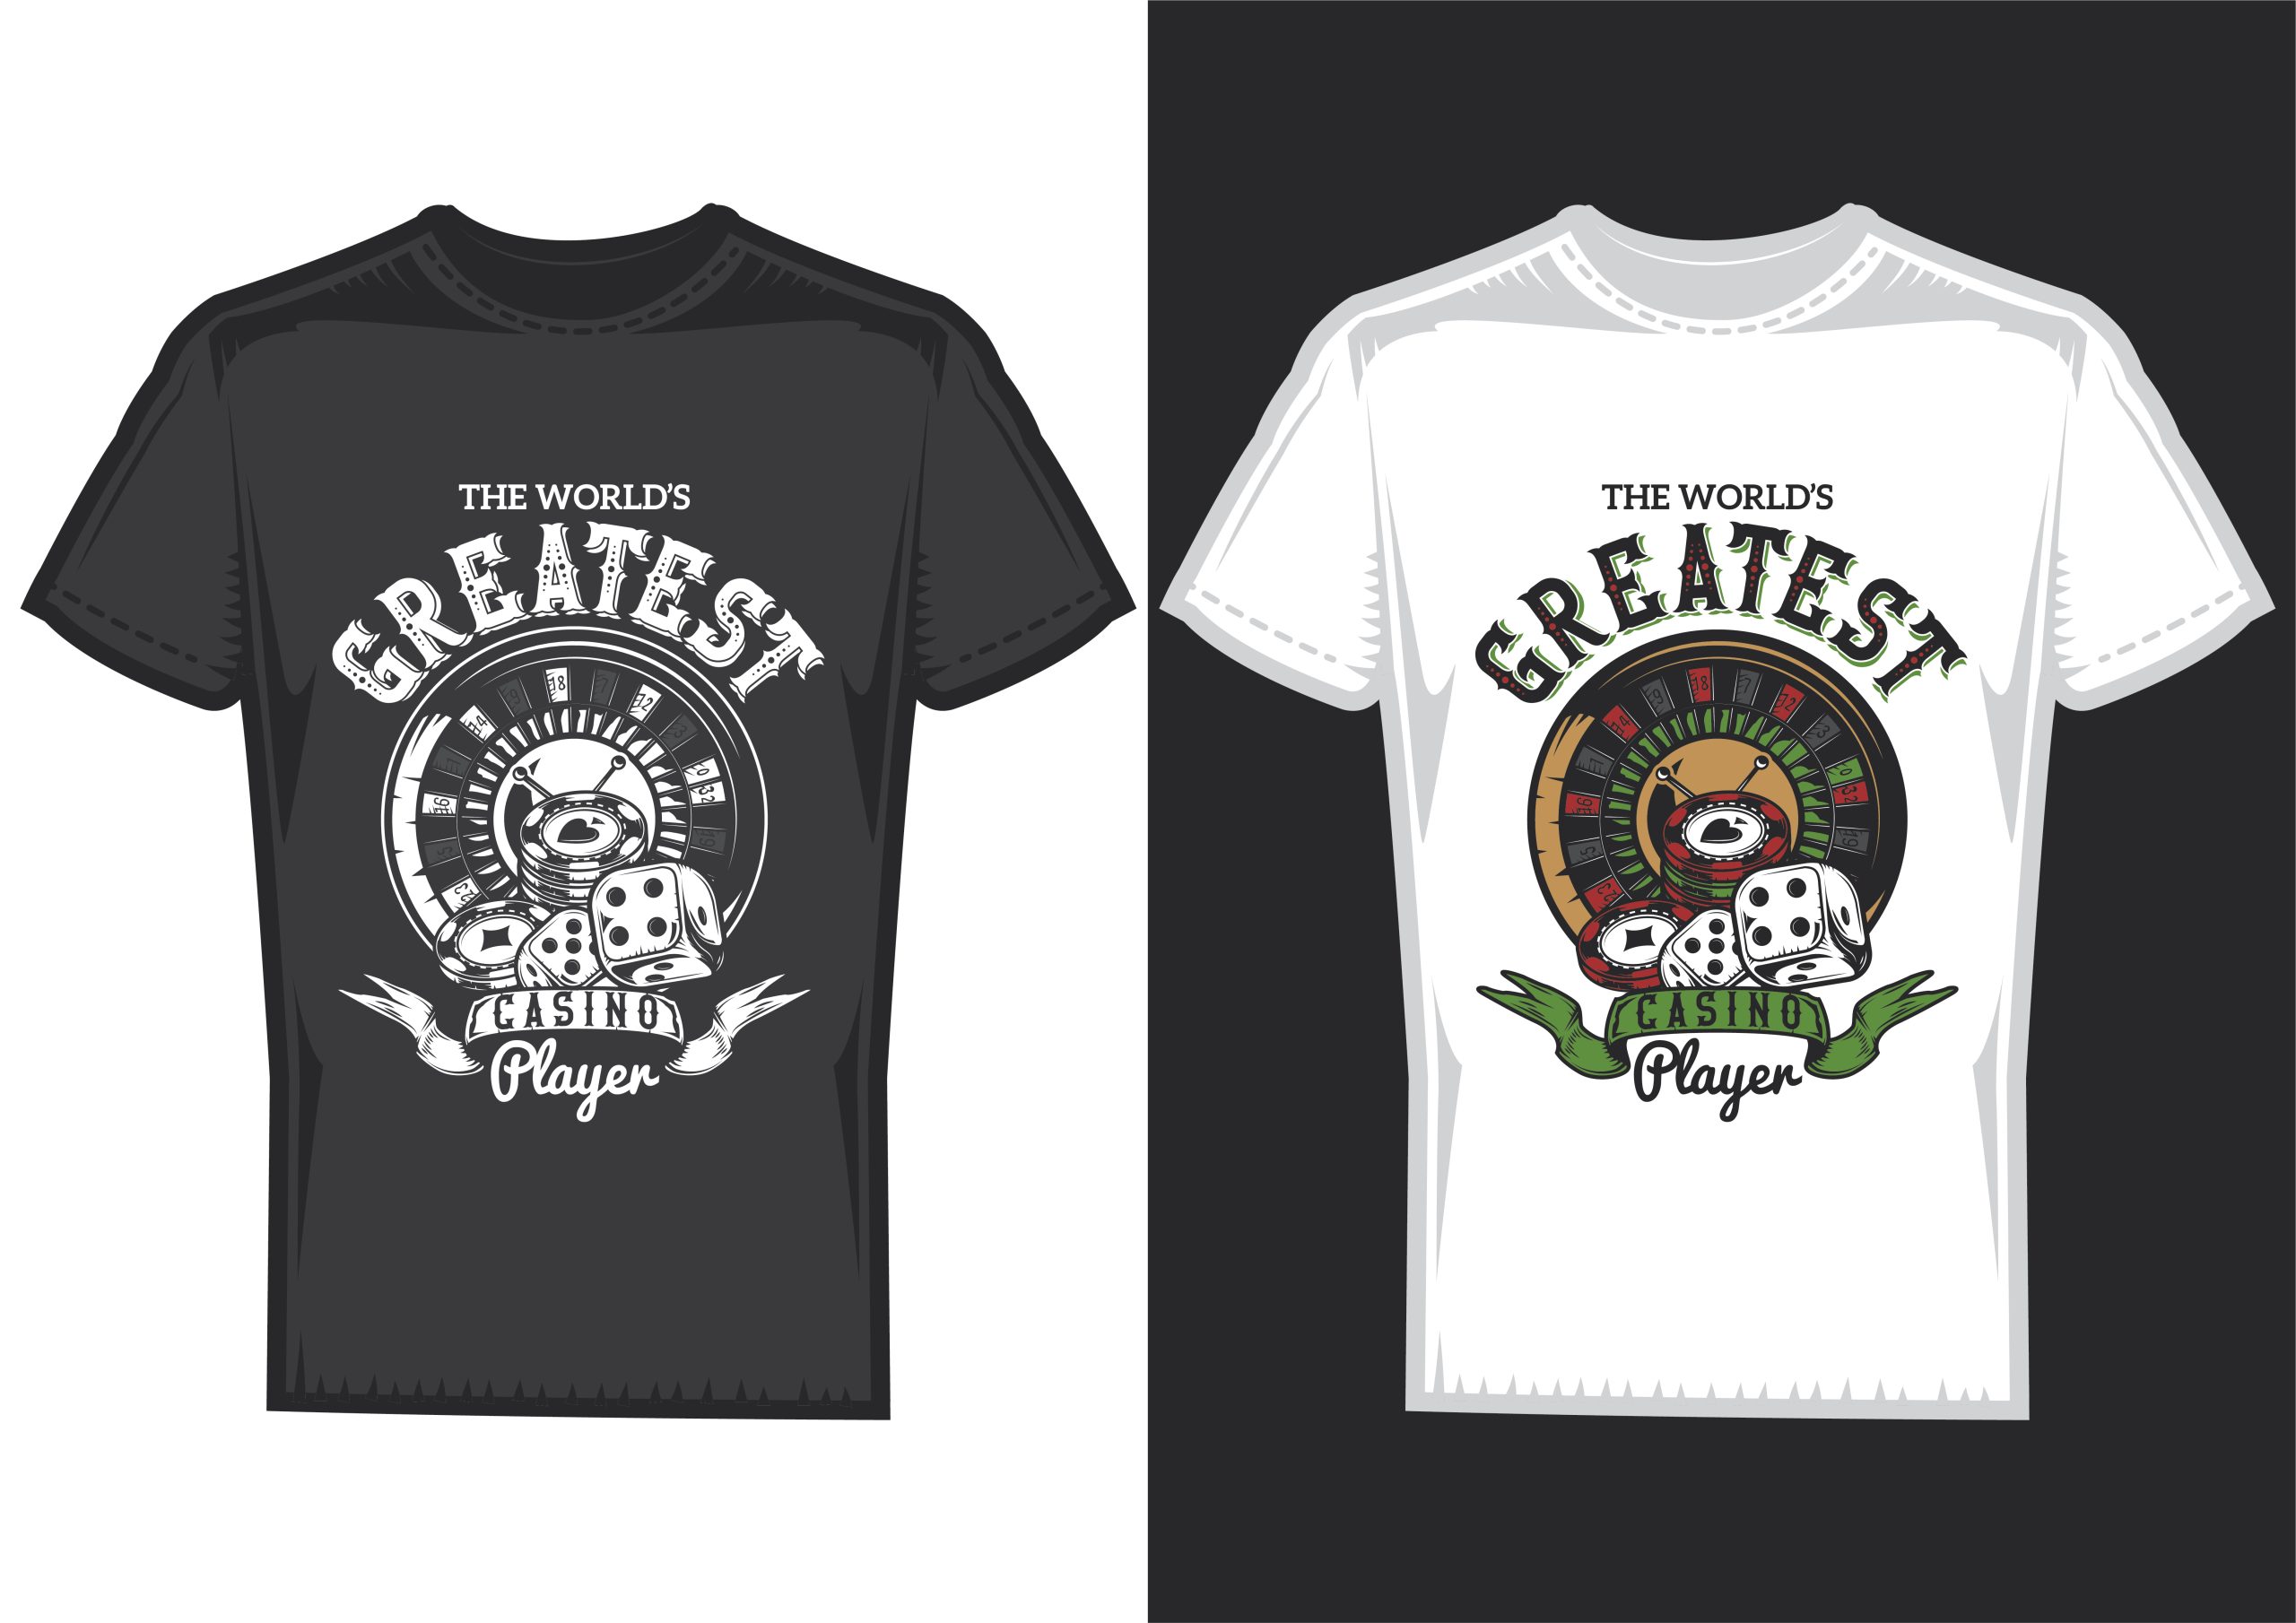 T-Shirts Design And Merchandise Service